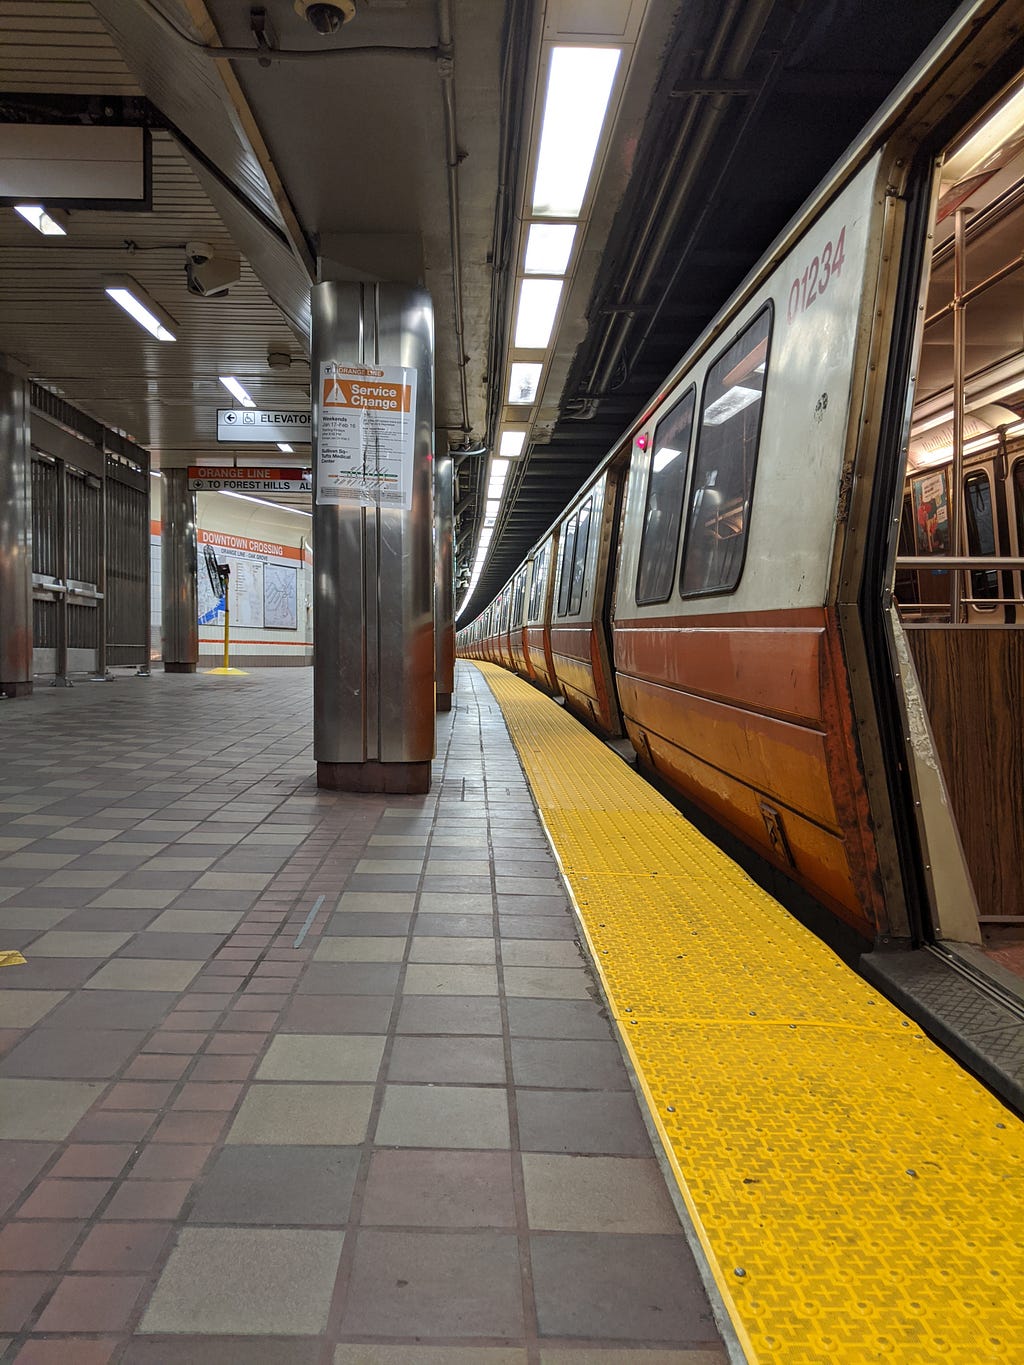 An Orange Line train waits at Downtown Crossing with doors open. There is a row of large pillars down the platform.